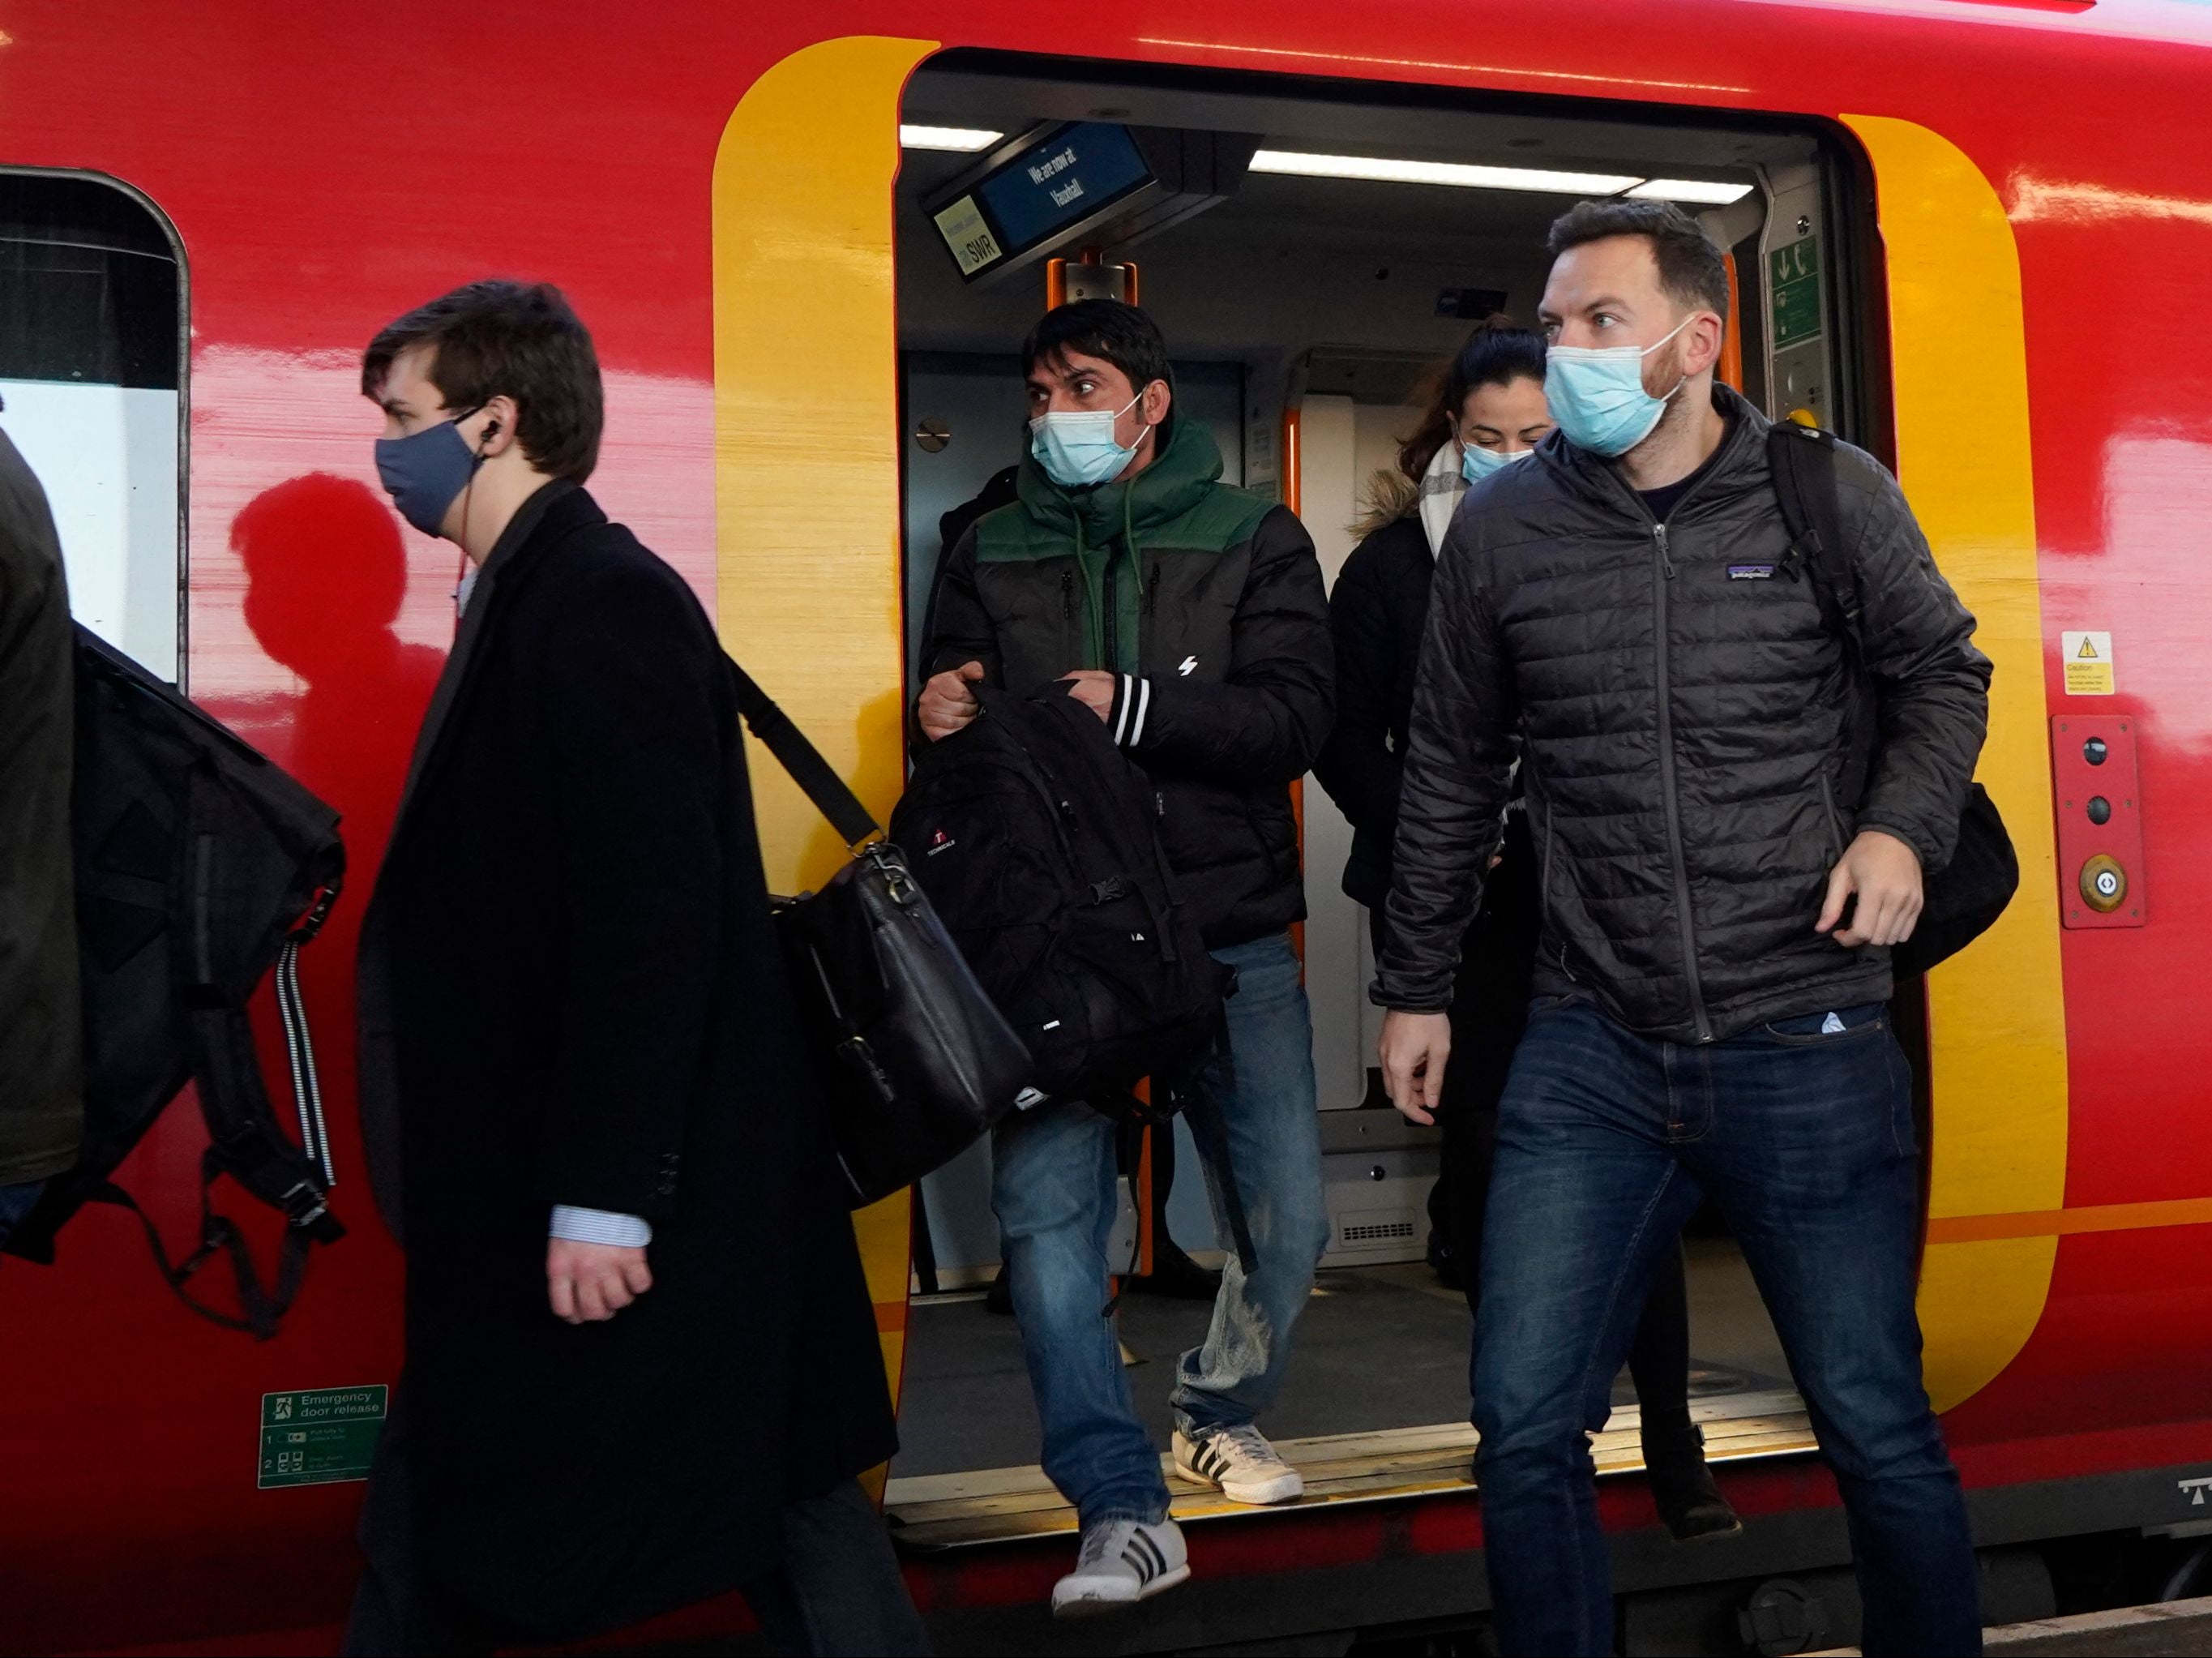 Commuters with face coverings leave a train